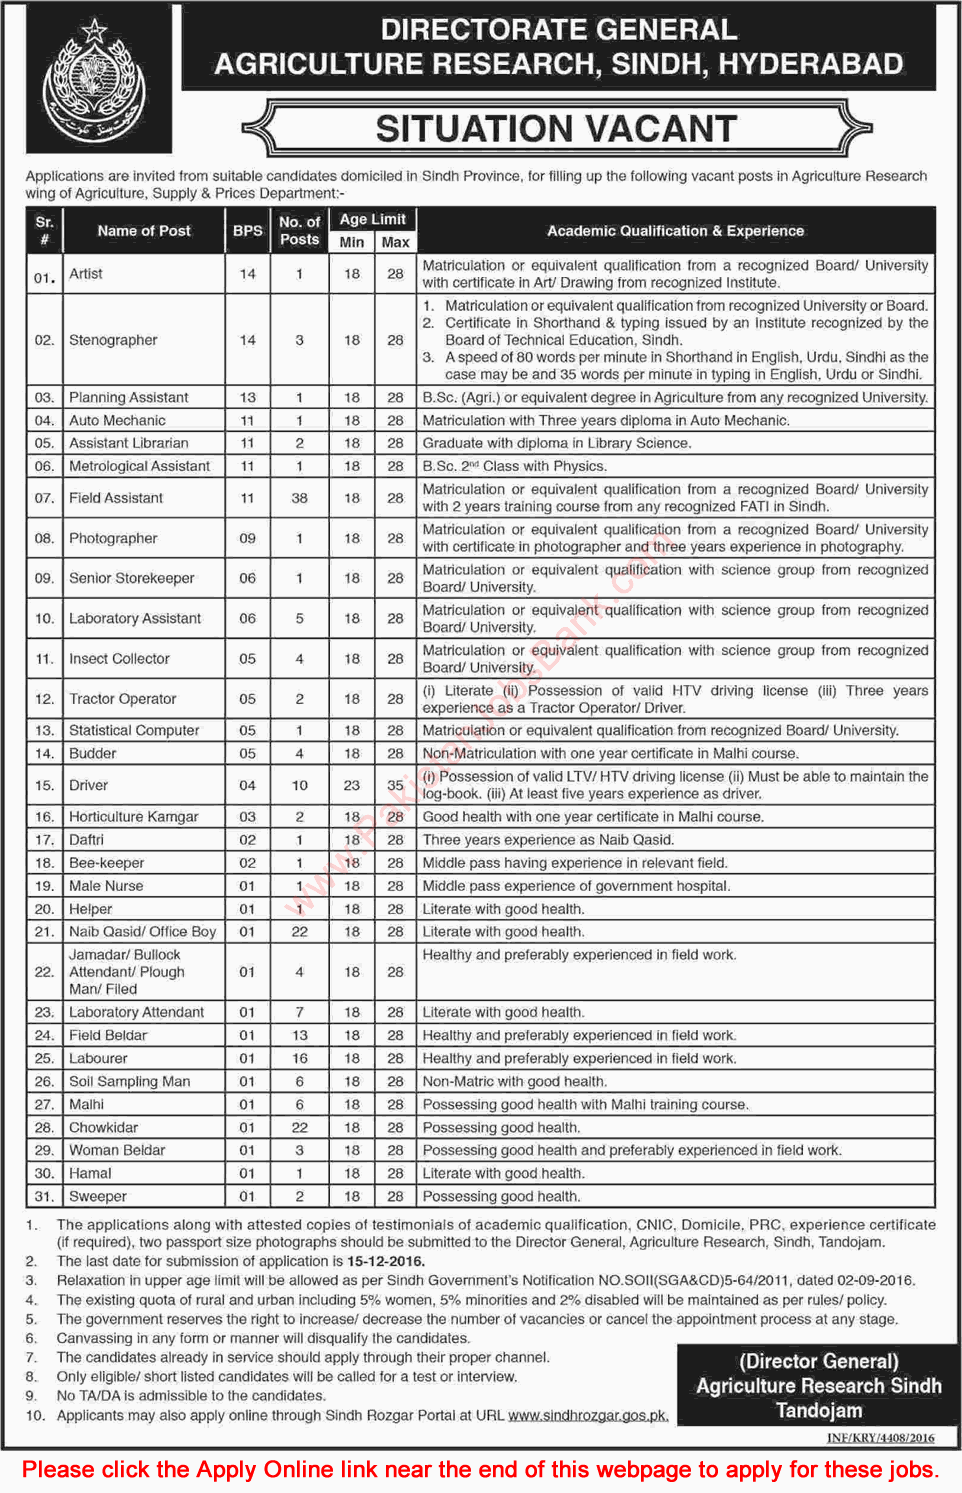 Agriculture Research Sindh Tandojam Jobs 2016 November / December Apply Online Agriculture Supply & Prices Department Latest